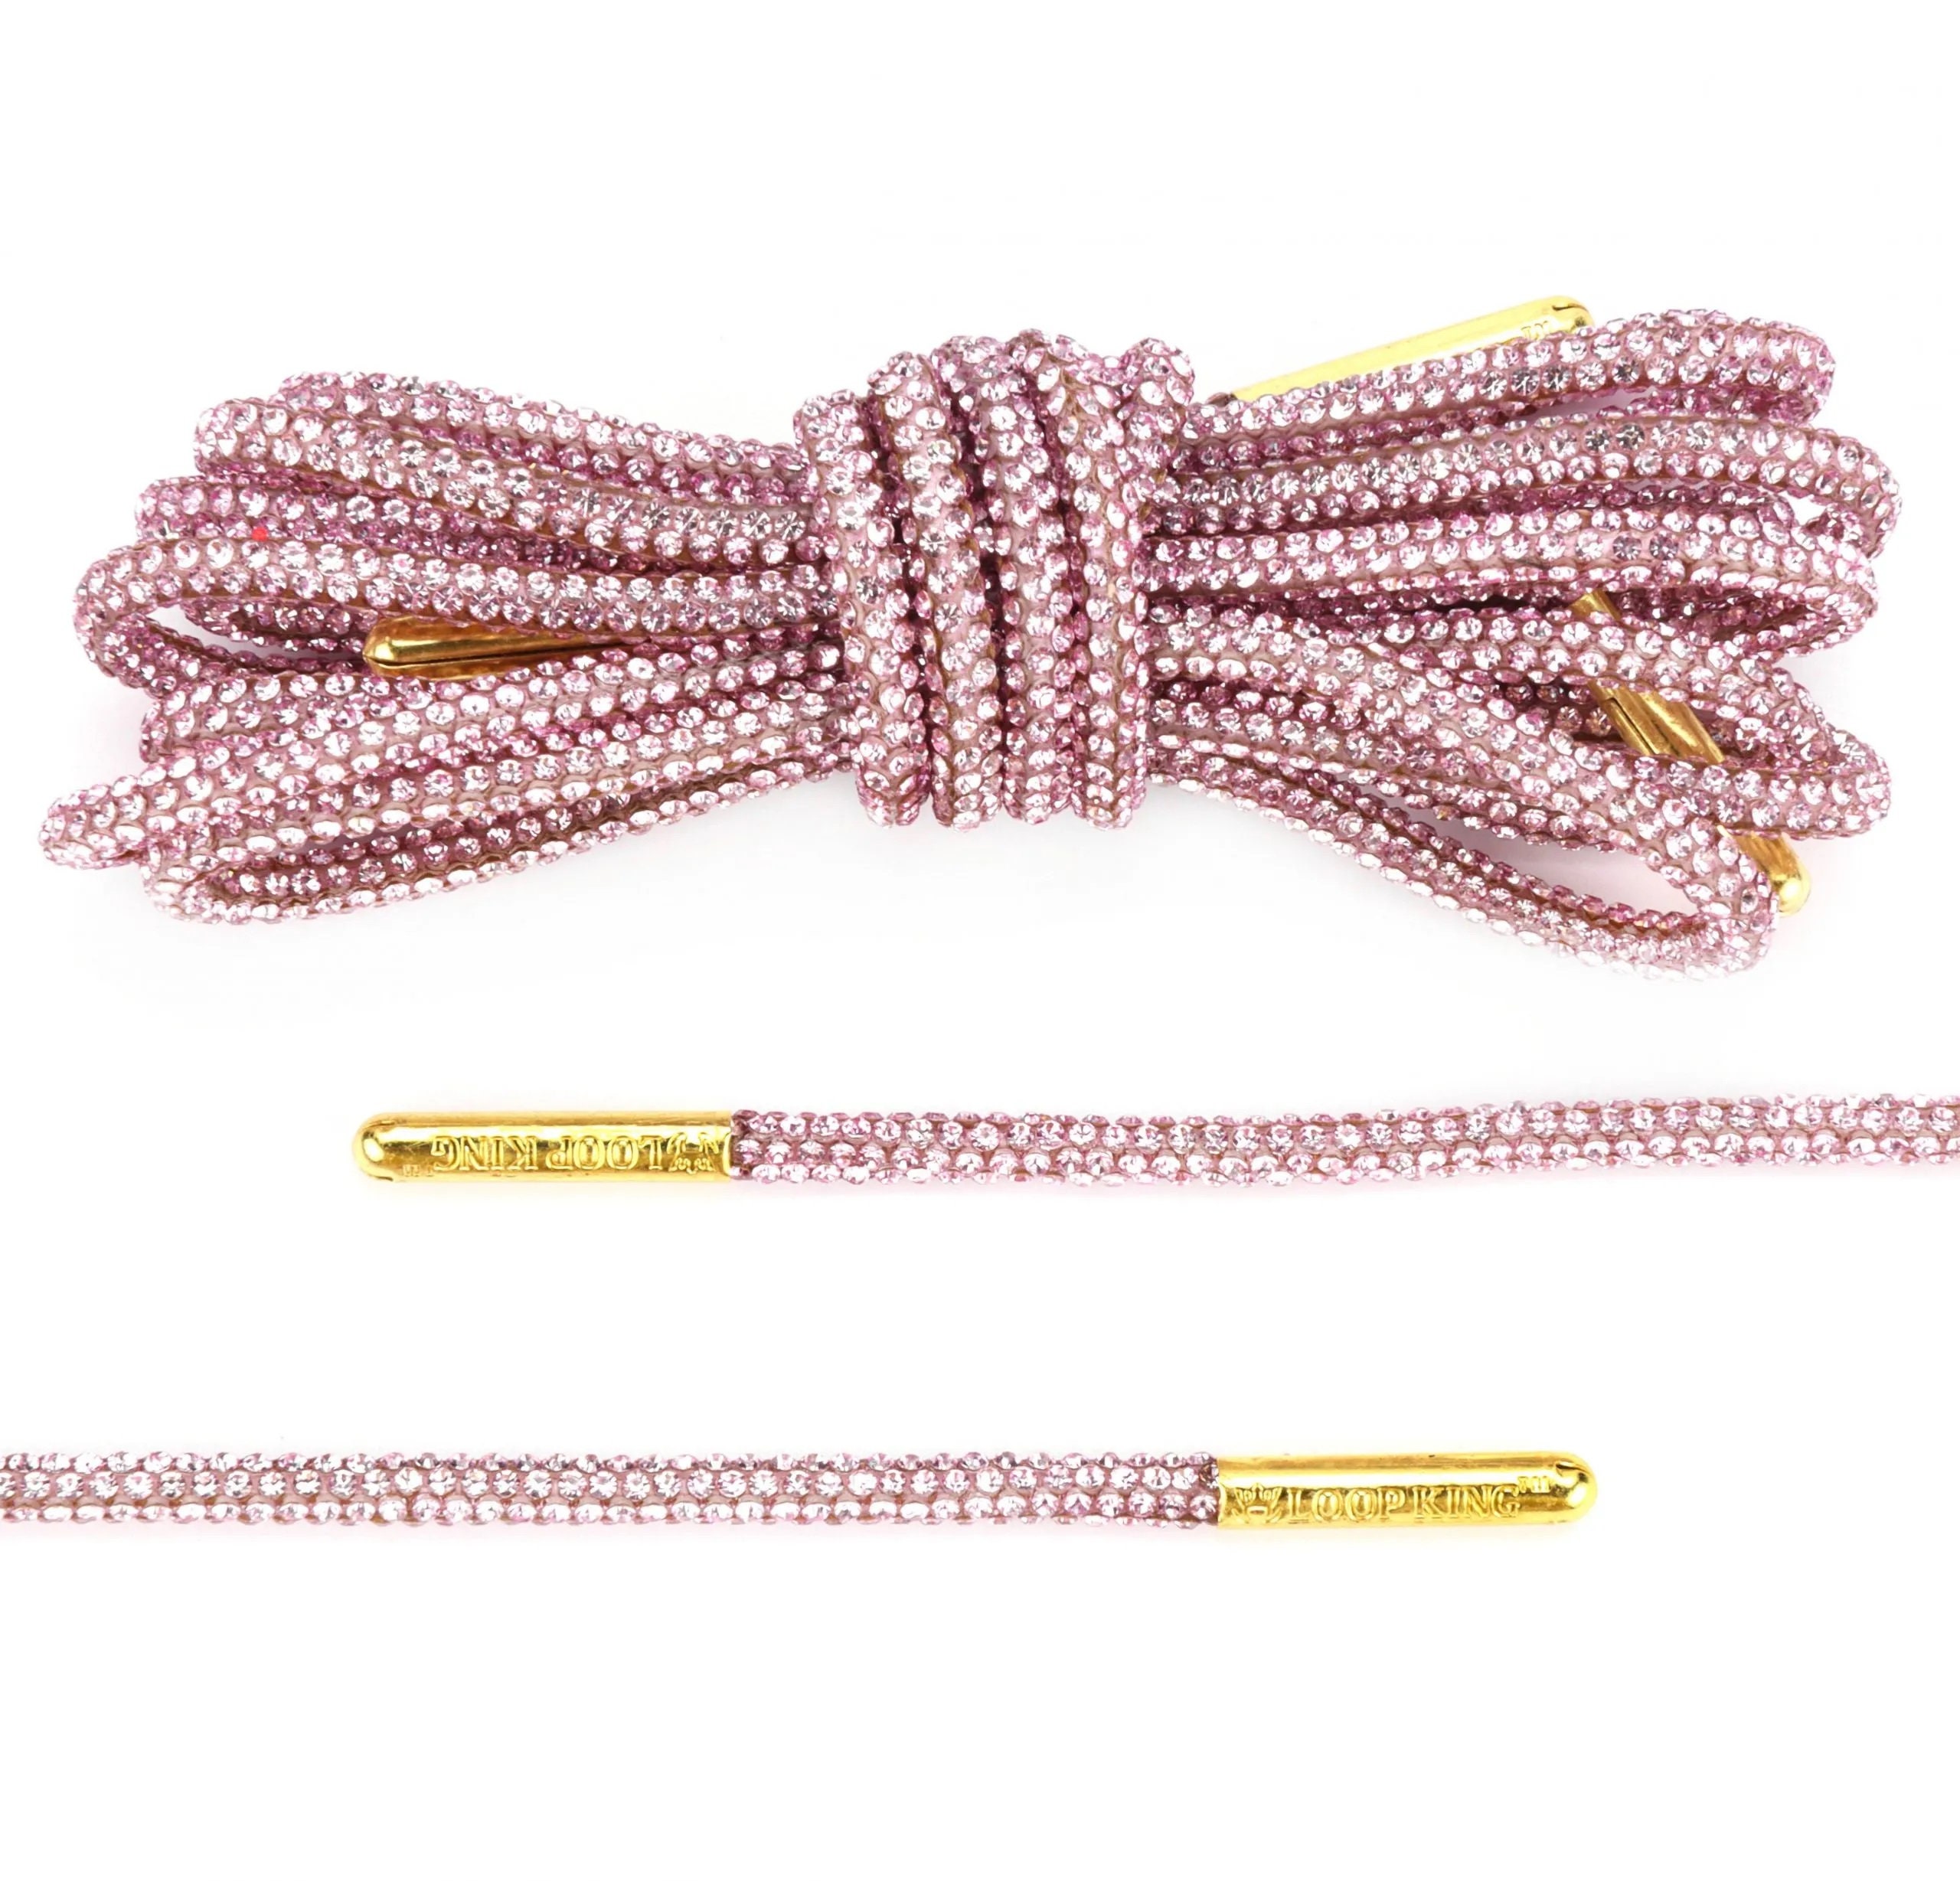 Rope White Grey Shoe Laces with Gold Tips - From Loop King